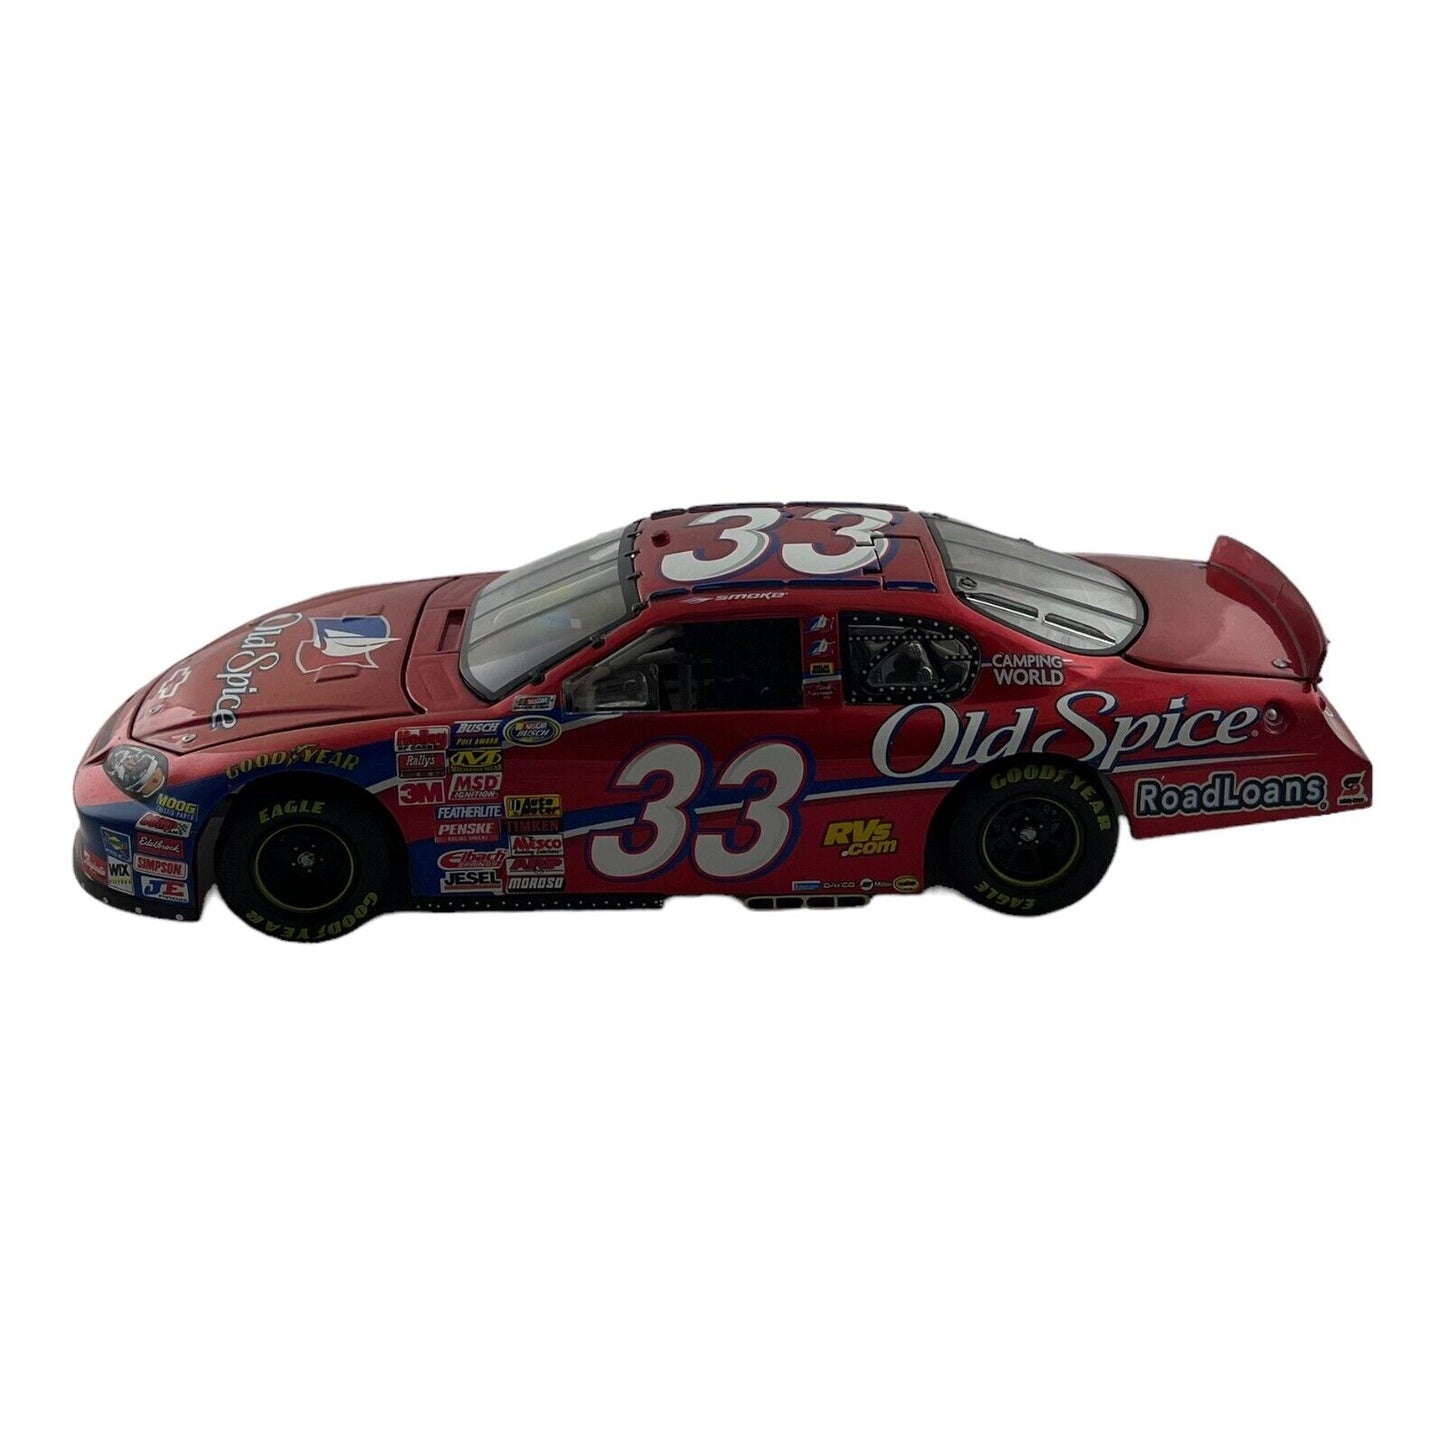 1:24 Scale Tony Stewart #33 Old Spice Diecast Vehicle 2007 Action